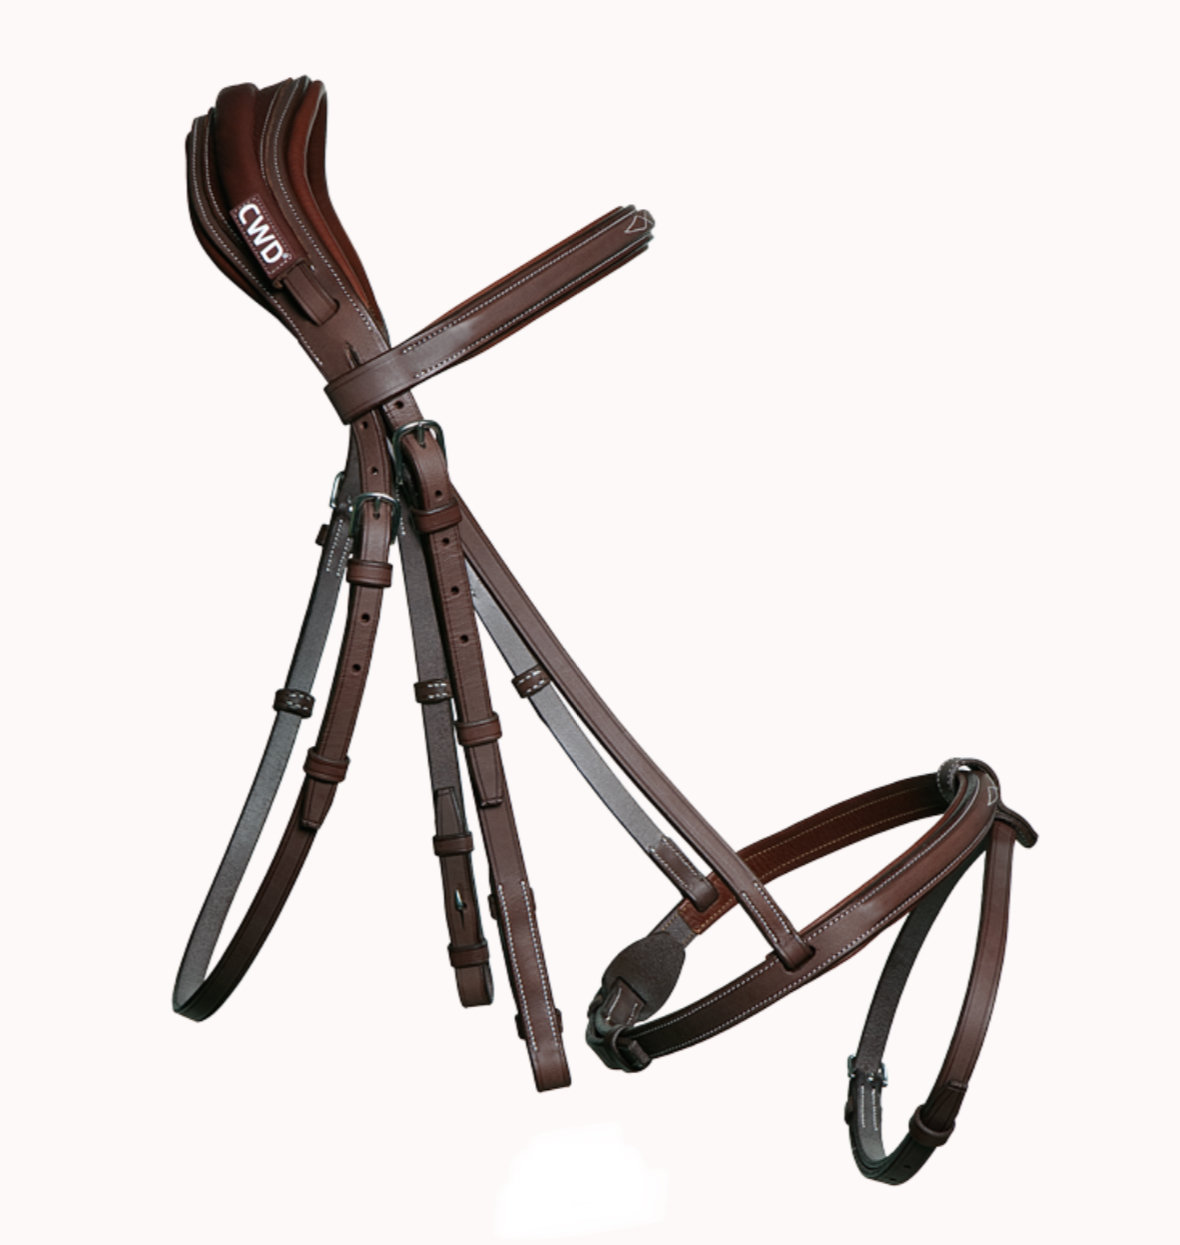 Anatomic French Noseband Bridle With Fancy Stitching